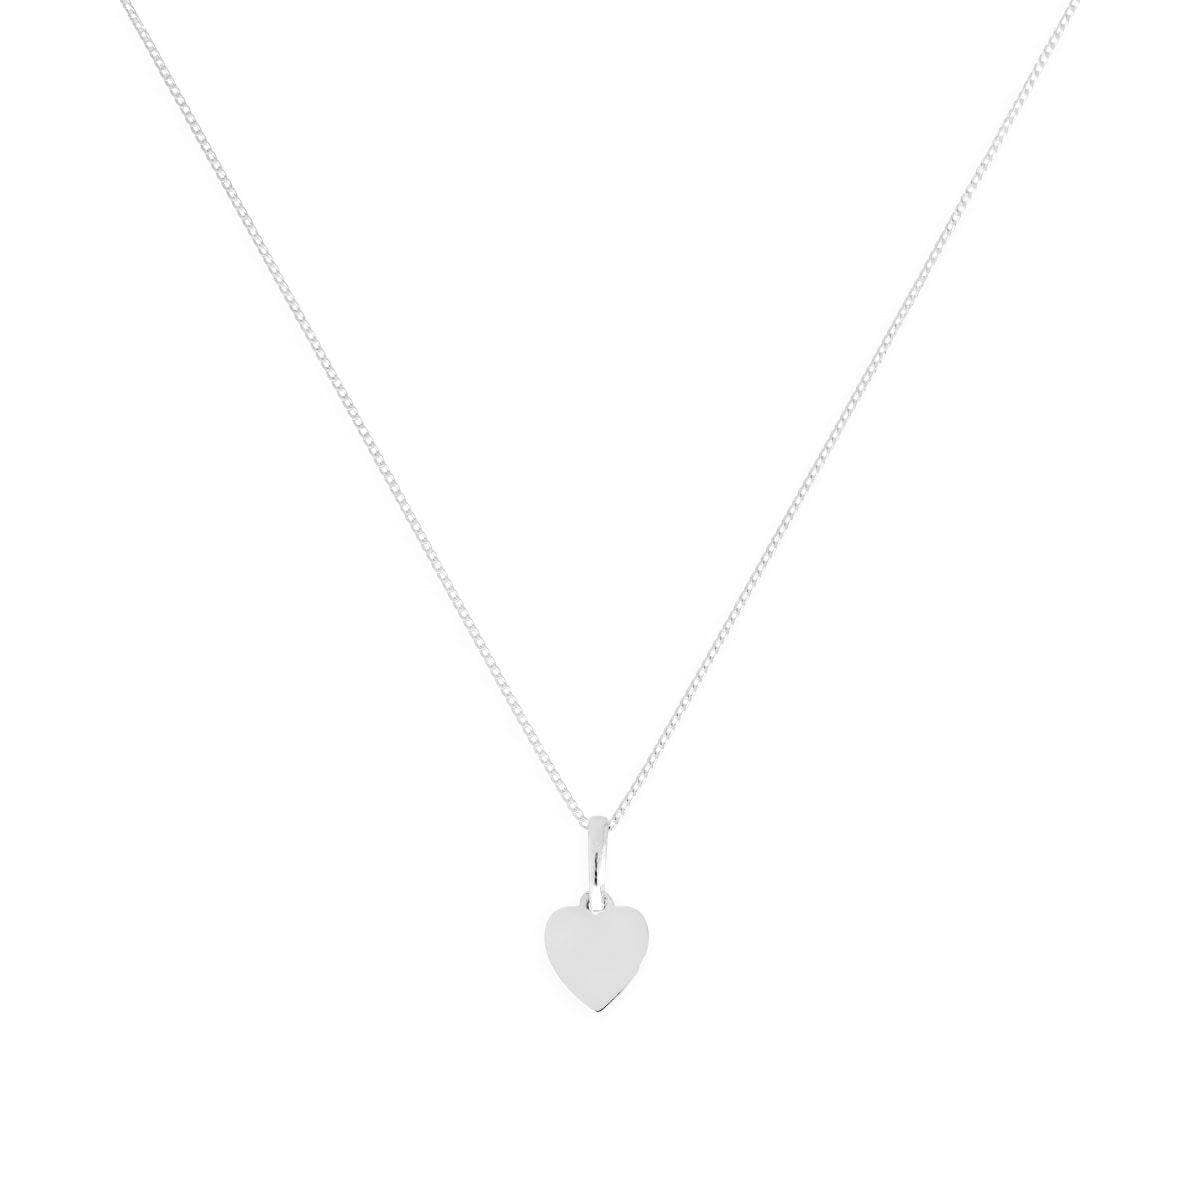 9ct White Gold Small Engravable Heart Pendant Necklace 16 - 20 Inches - jewellerybox